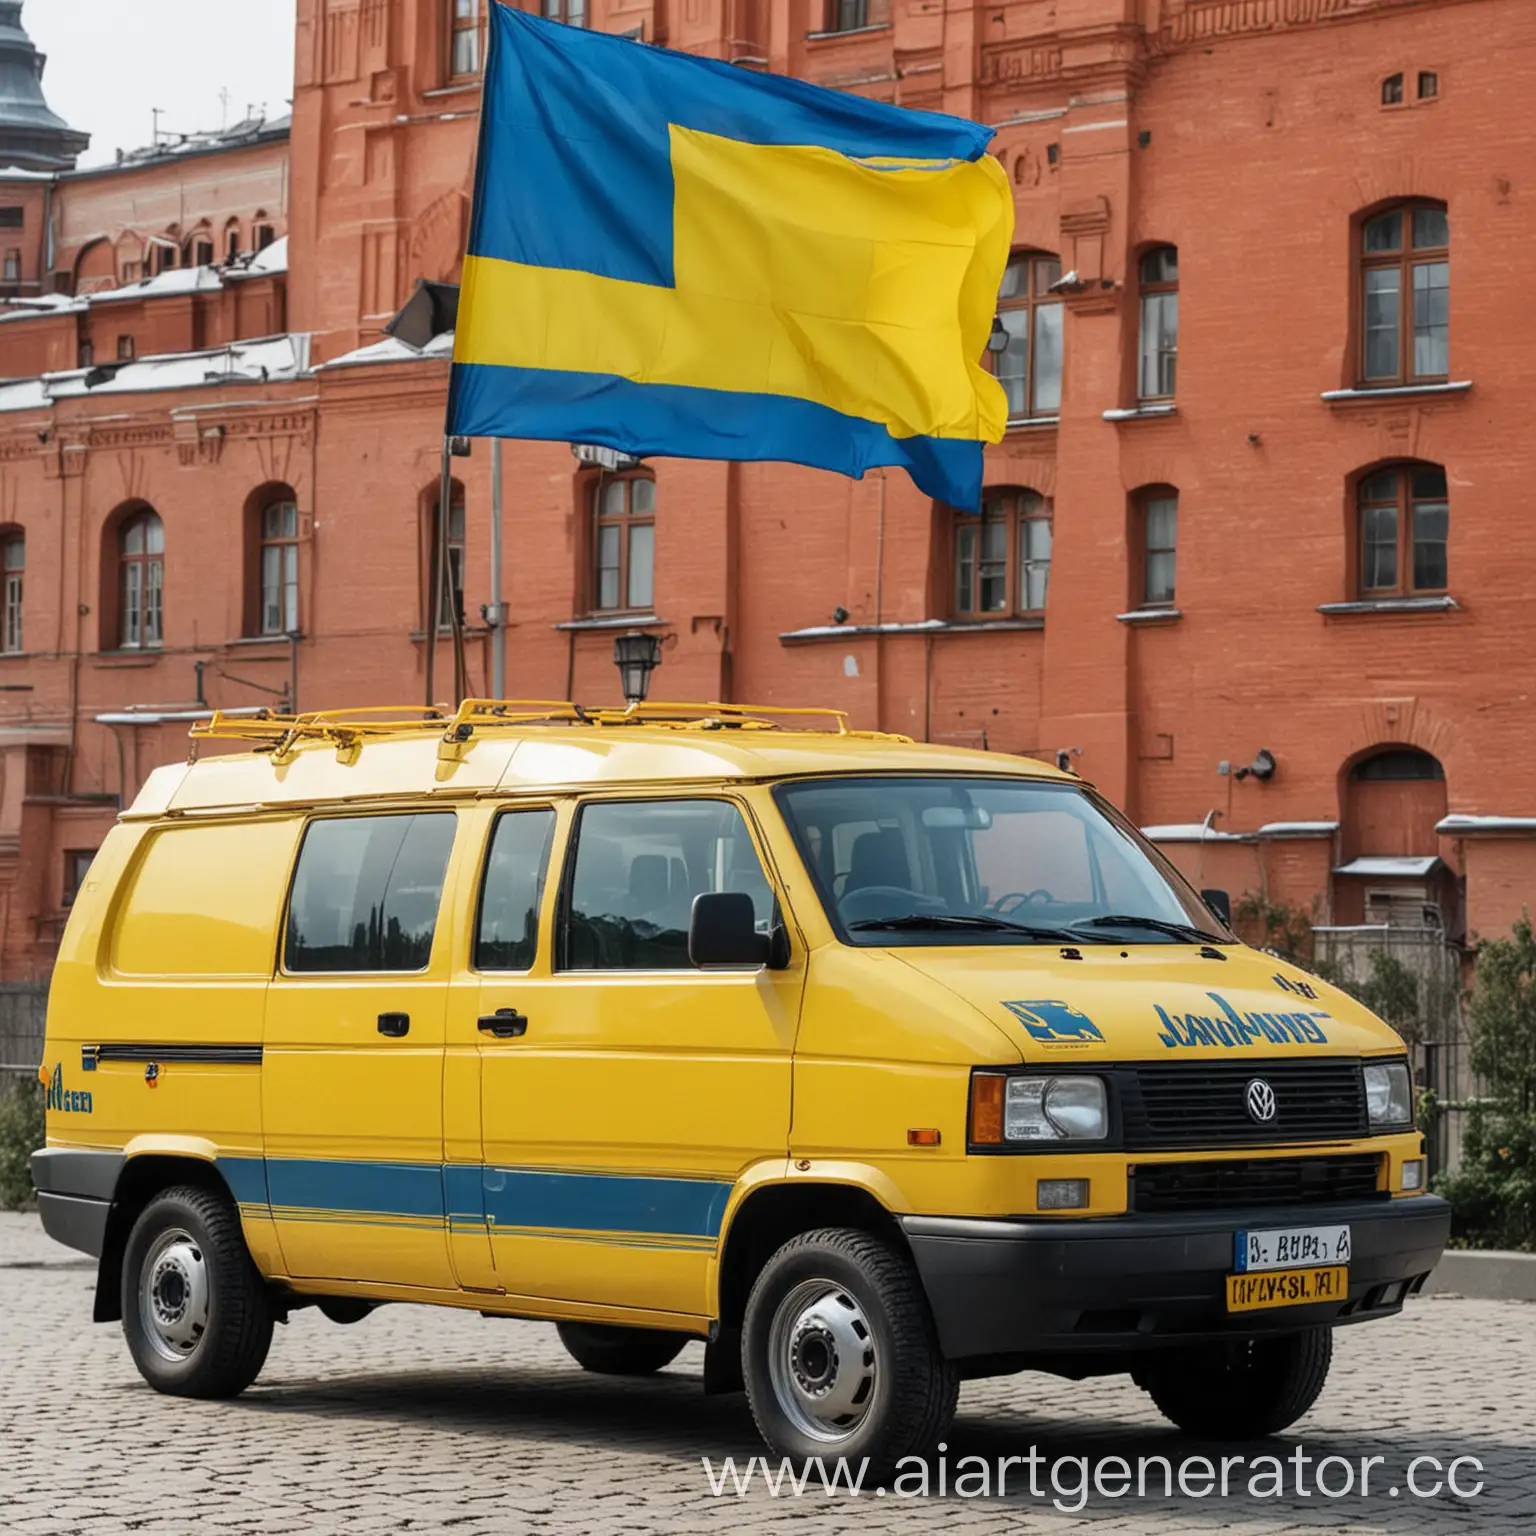 Volkswagen-Transporter-T4-and-Daewoo-Lanos-with-Ukrainian-Flag-on-Red-Square